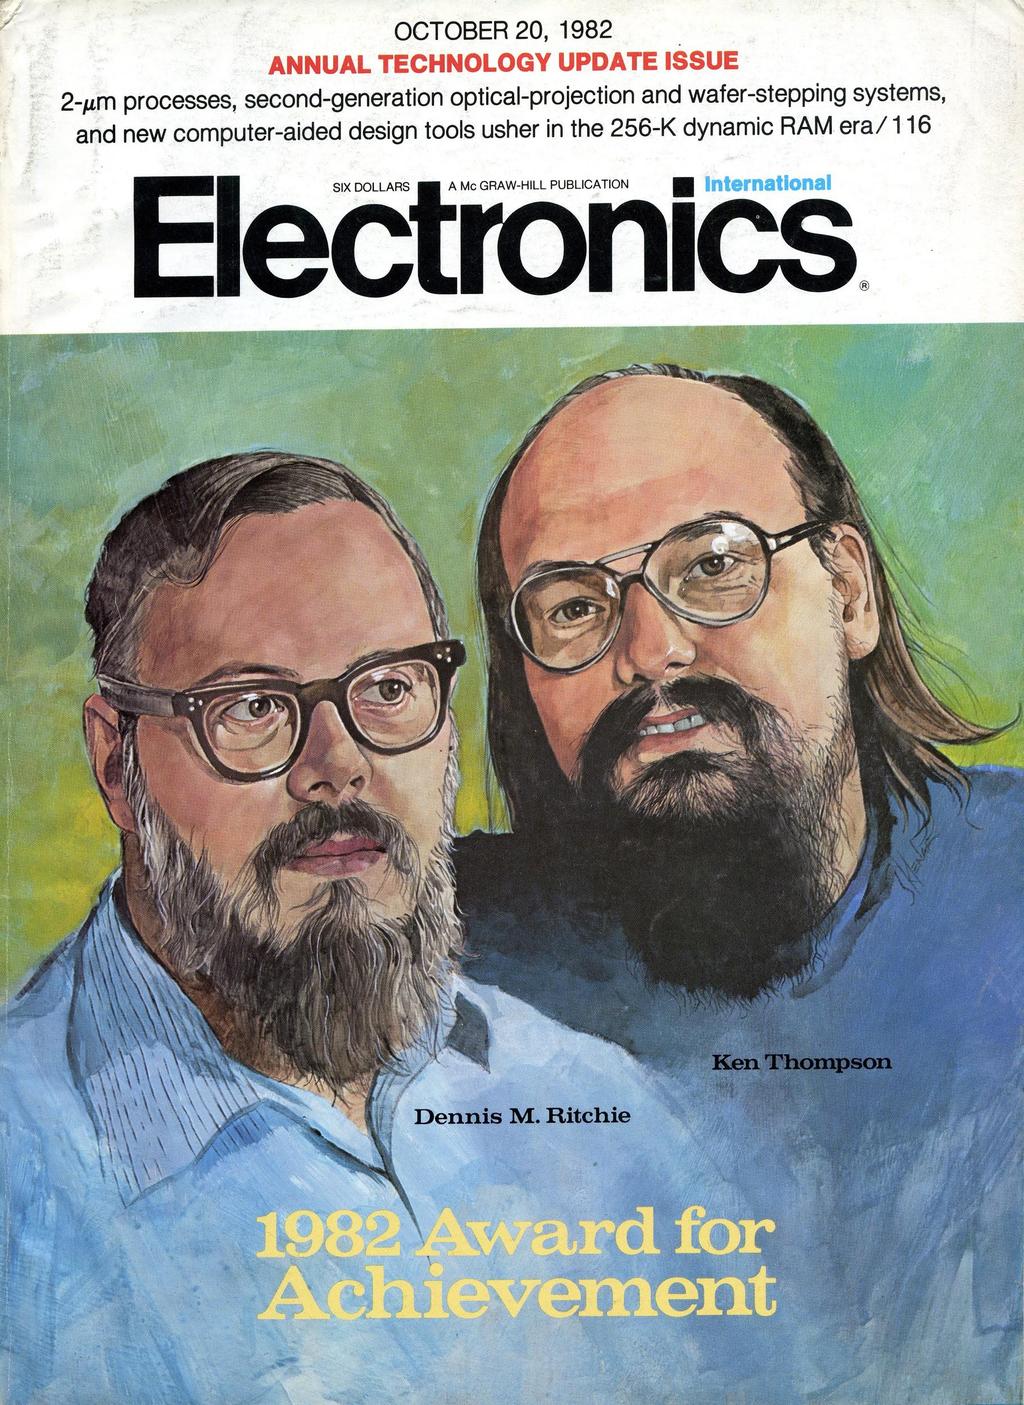 AT&T Unix Operating system developed in the 1970s at Bell Labs by a team led by Ken Thompson and Dennis Ritchie Operating Systems Unix GNU Project 1972, rewritten in C.